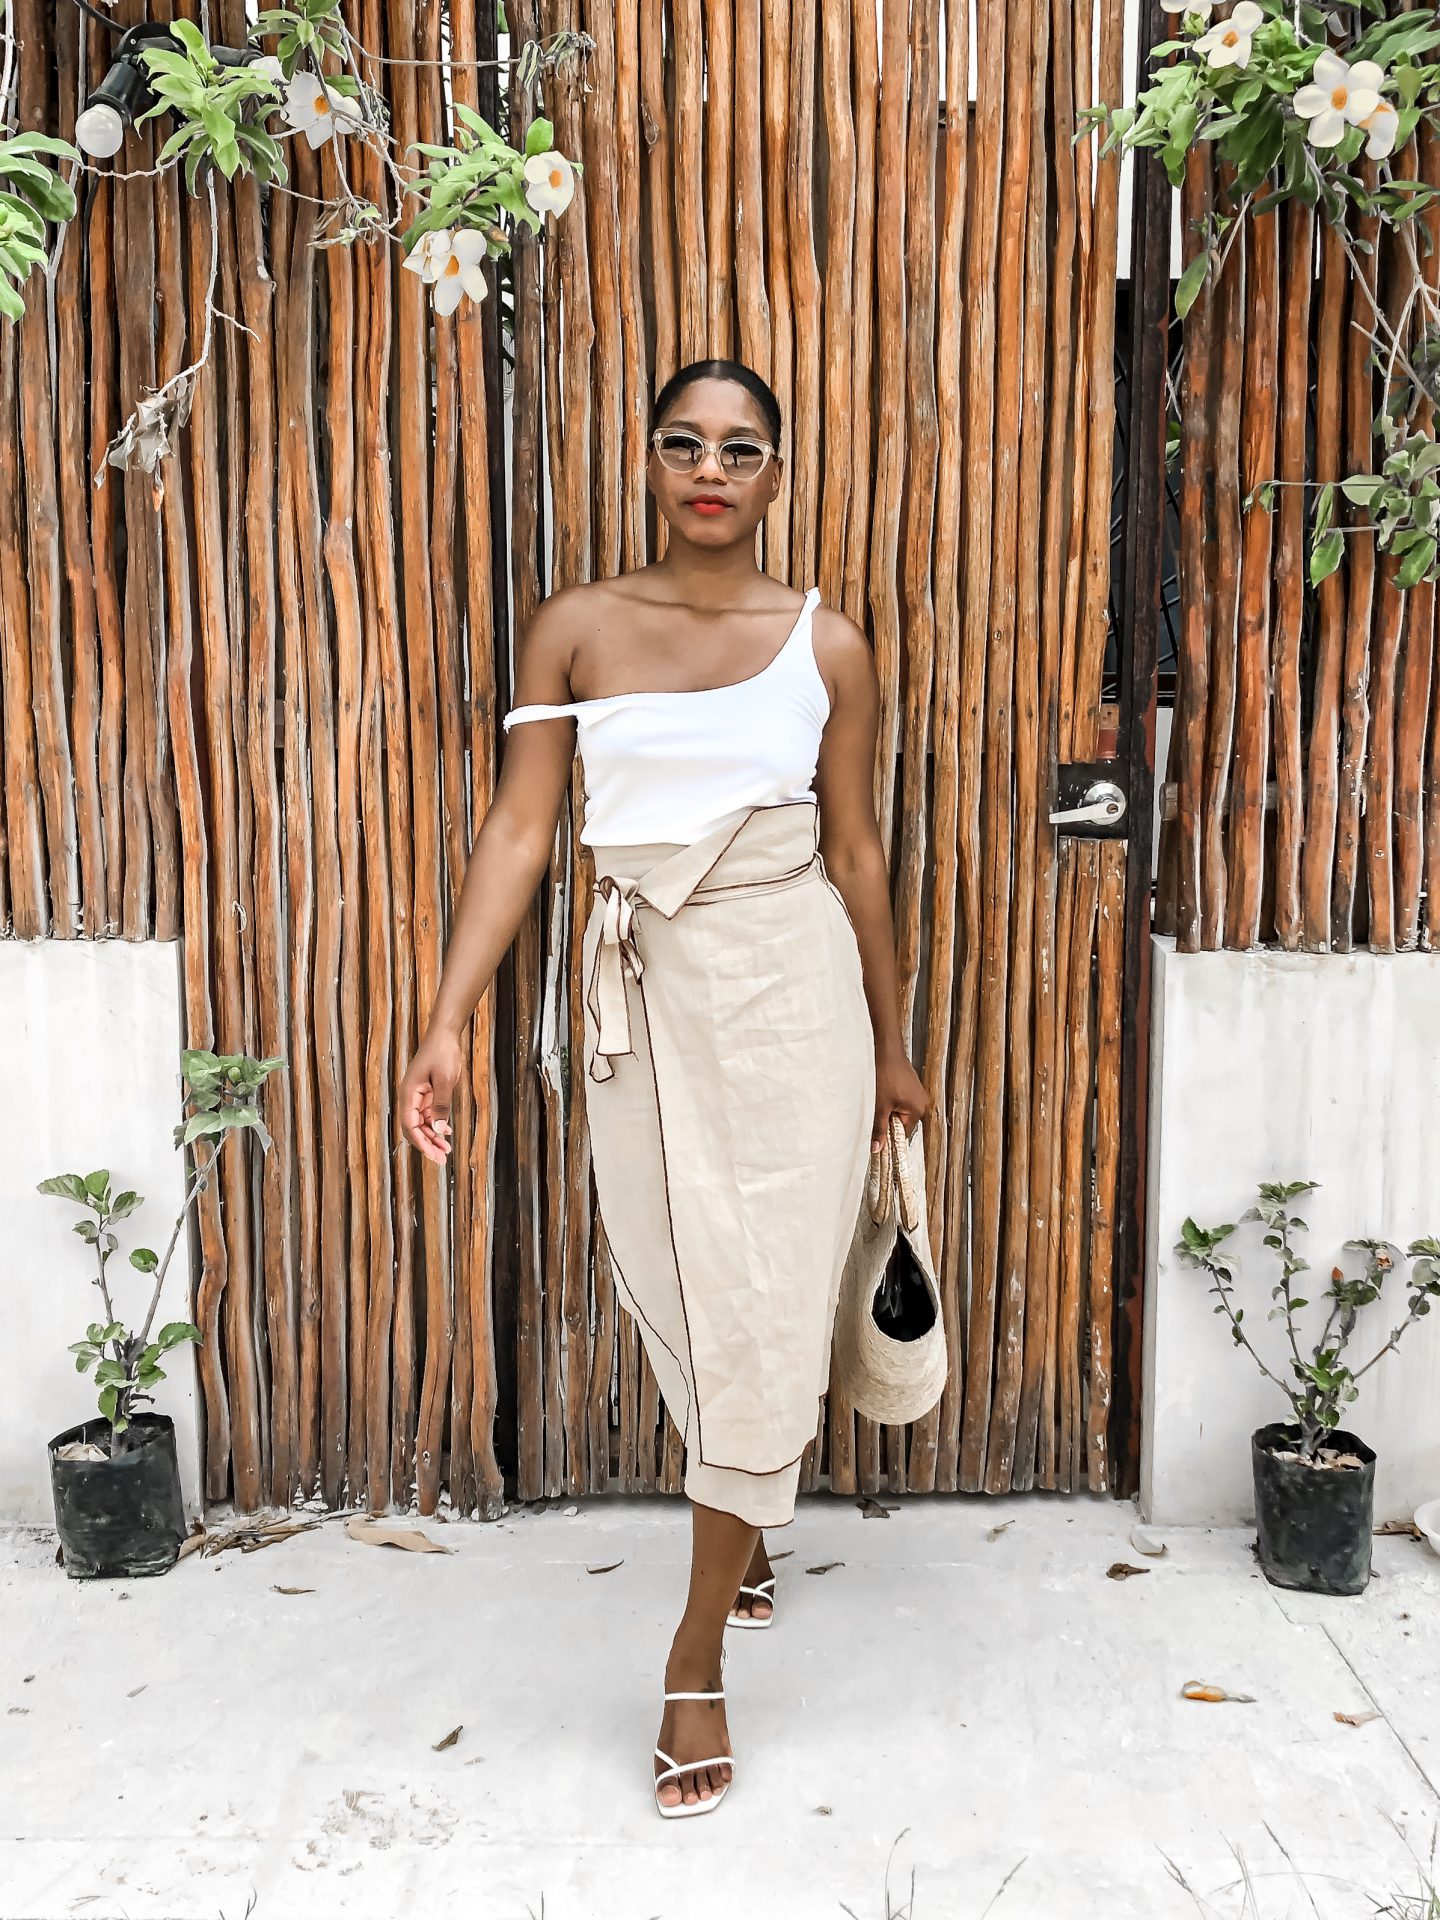 The Chic Girls Guide to Tulum Mexico 2019 – Fashion Steele NYC